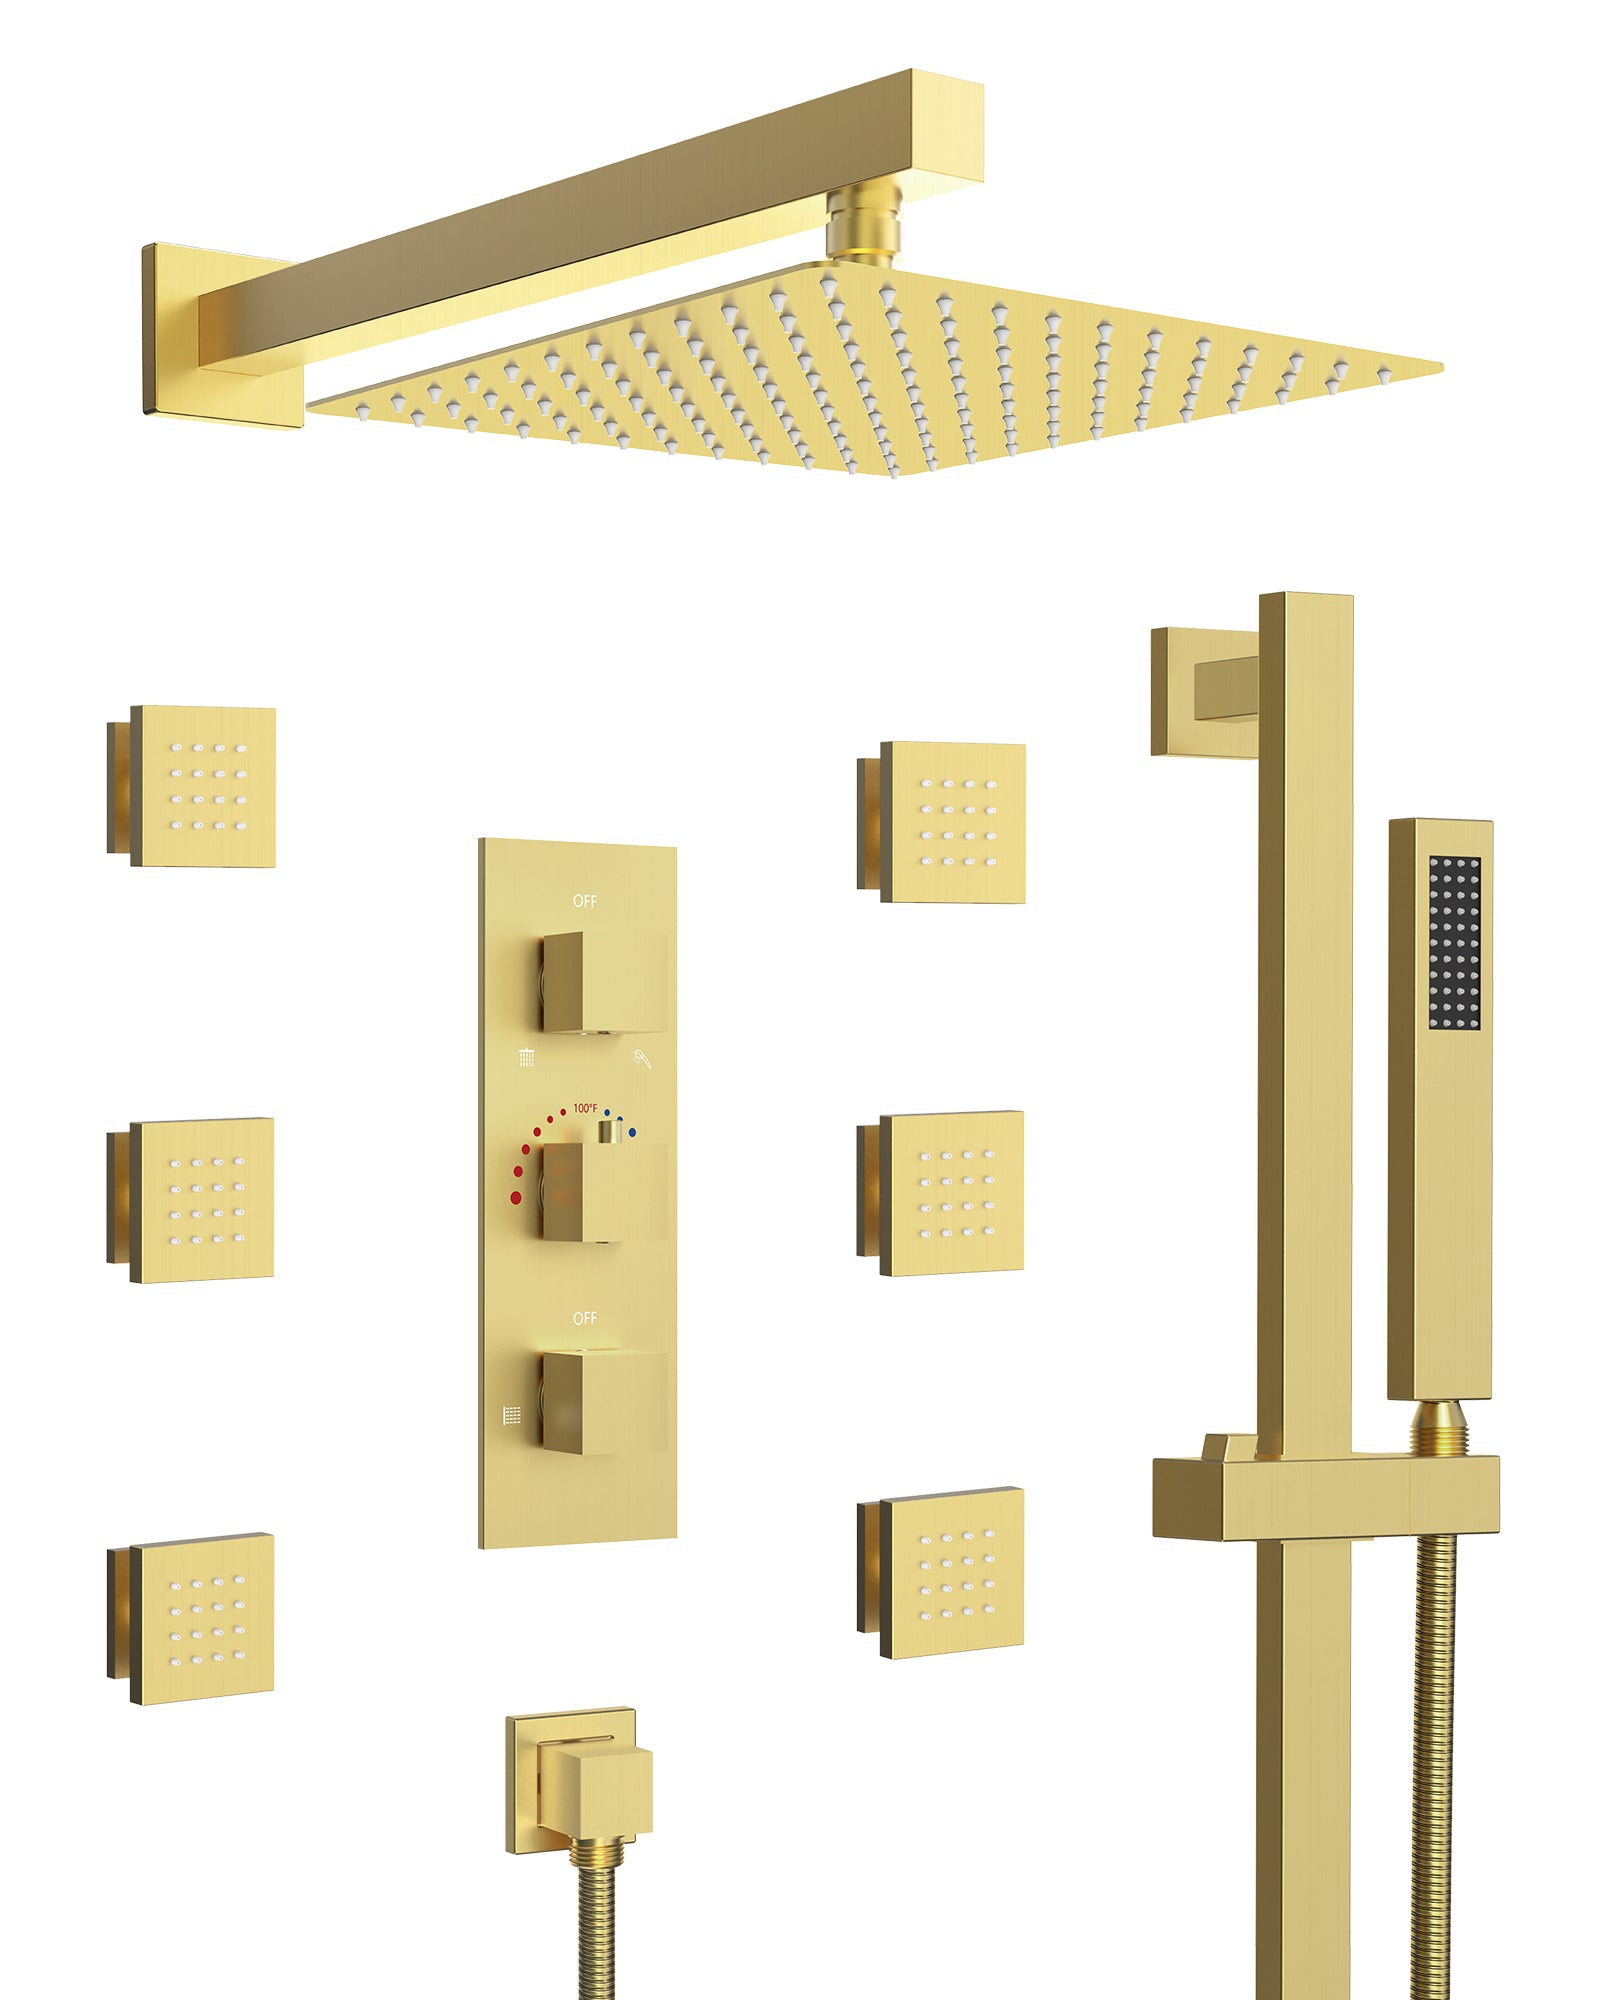 SFS-1016-GD12 EVERSTEIN Luxury wall mounted shower faucet system with fixed device and rough valve, with 6 body massage spray and hand-held shower faucet in Brushed Gold